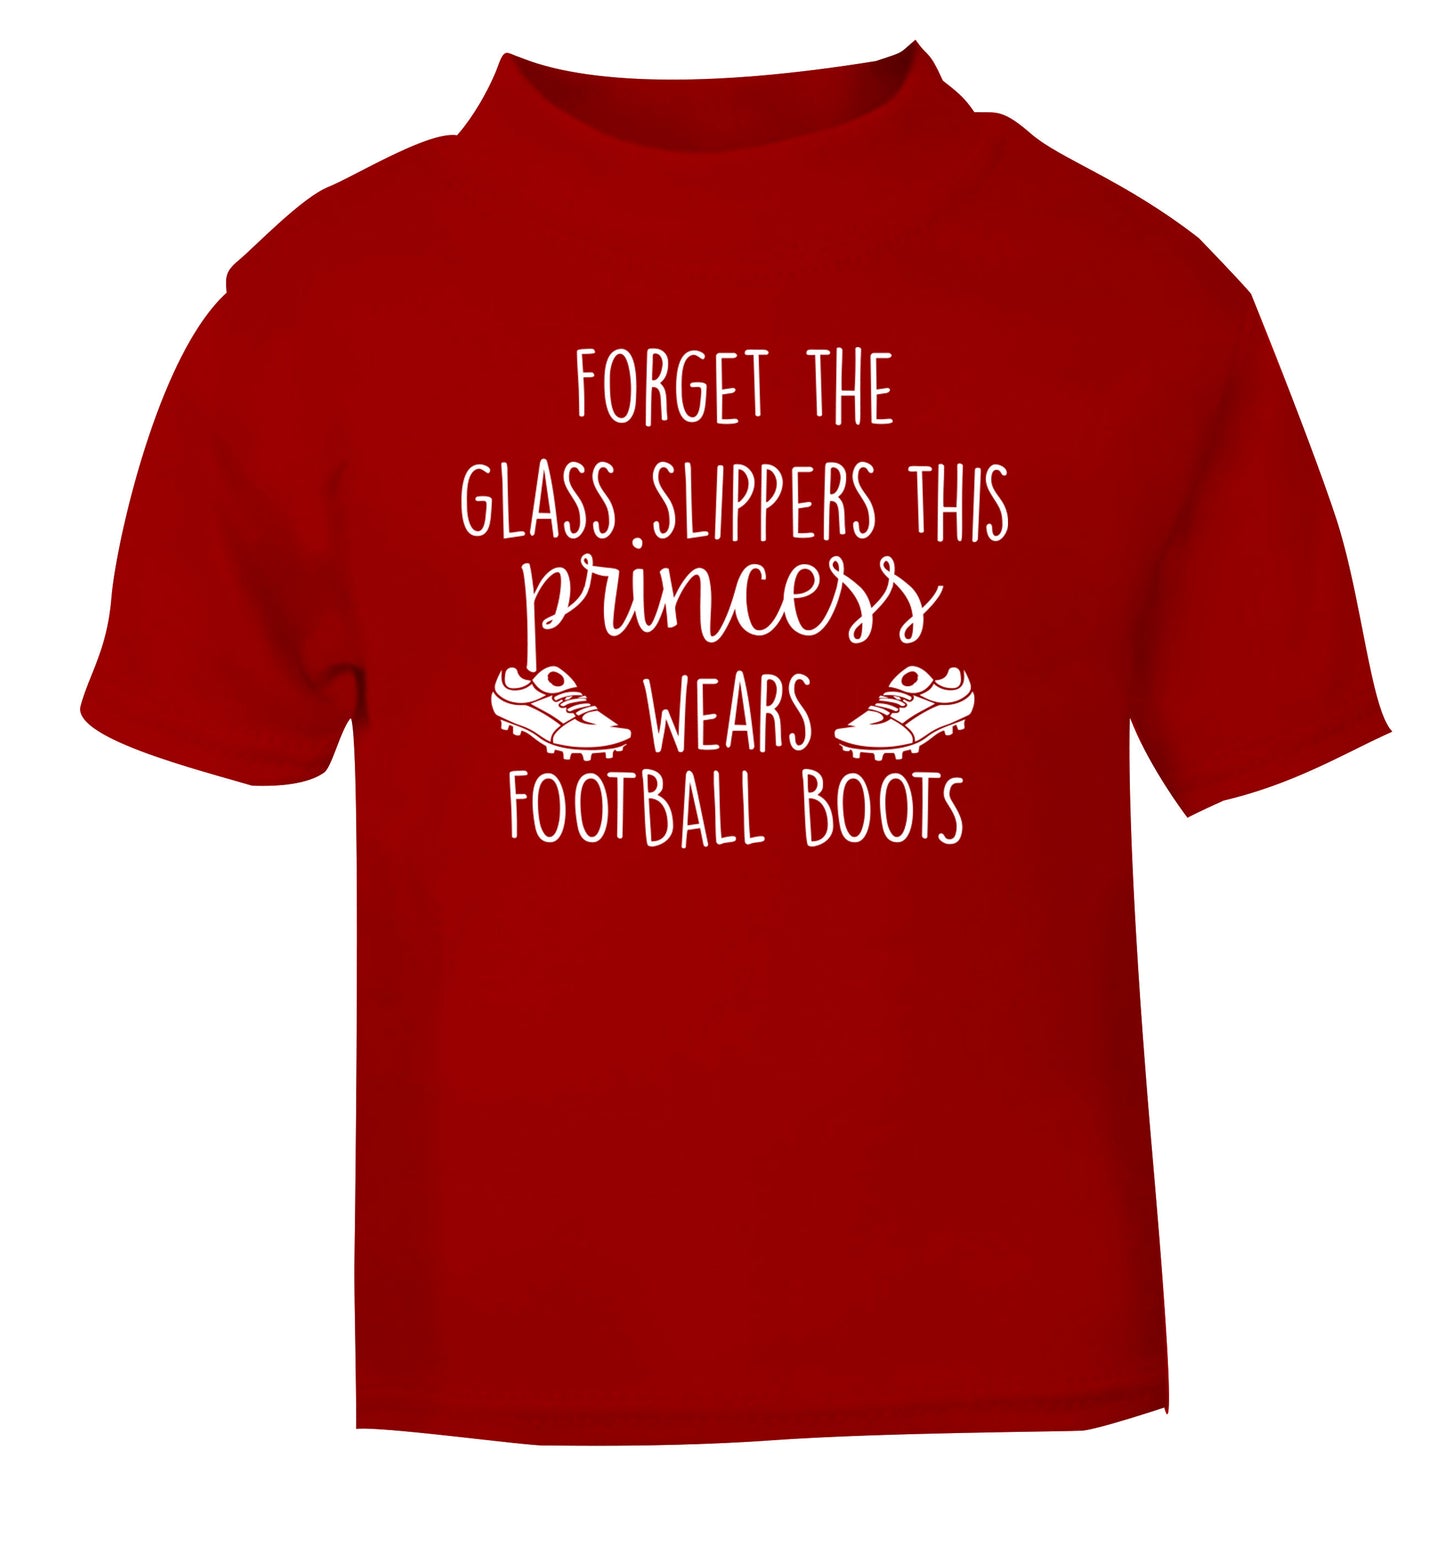 Forget the glass slippers this princess wears football boots red Baby Toddler Tshirt 2 Years